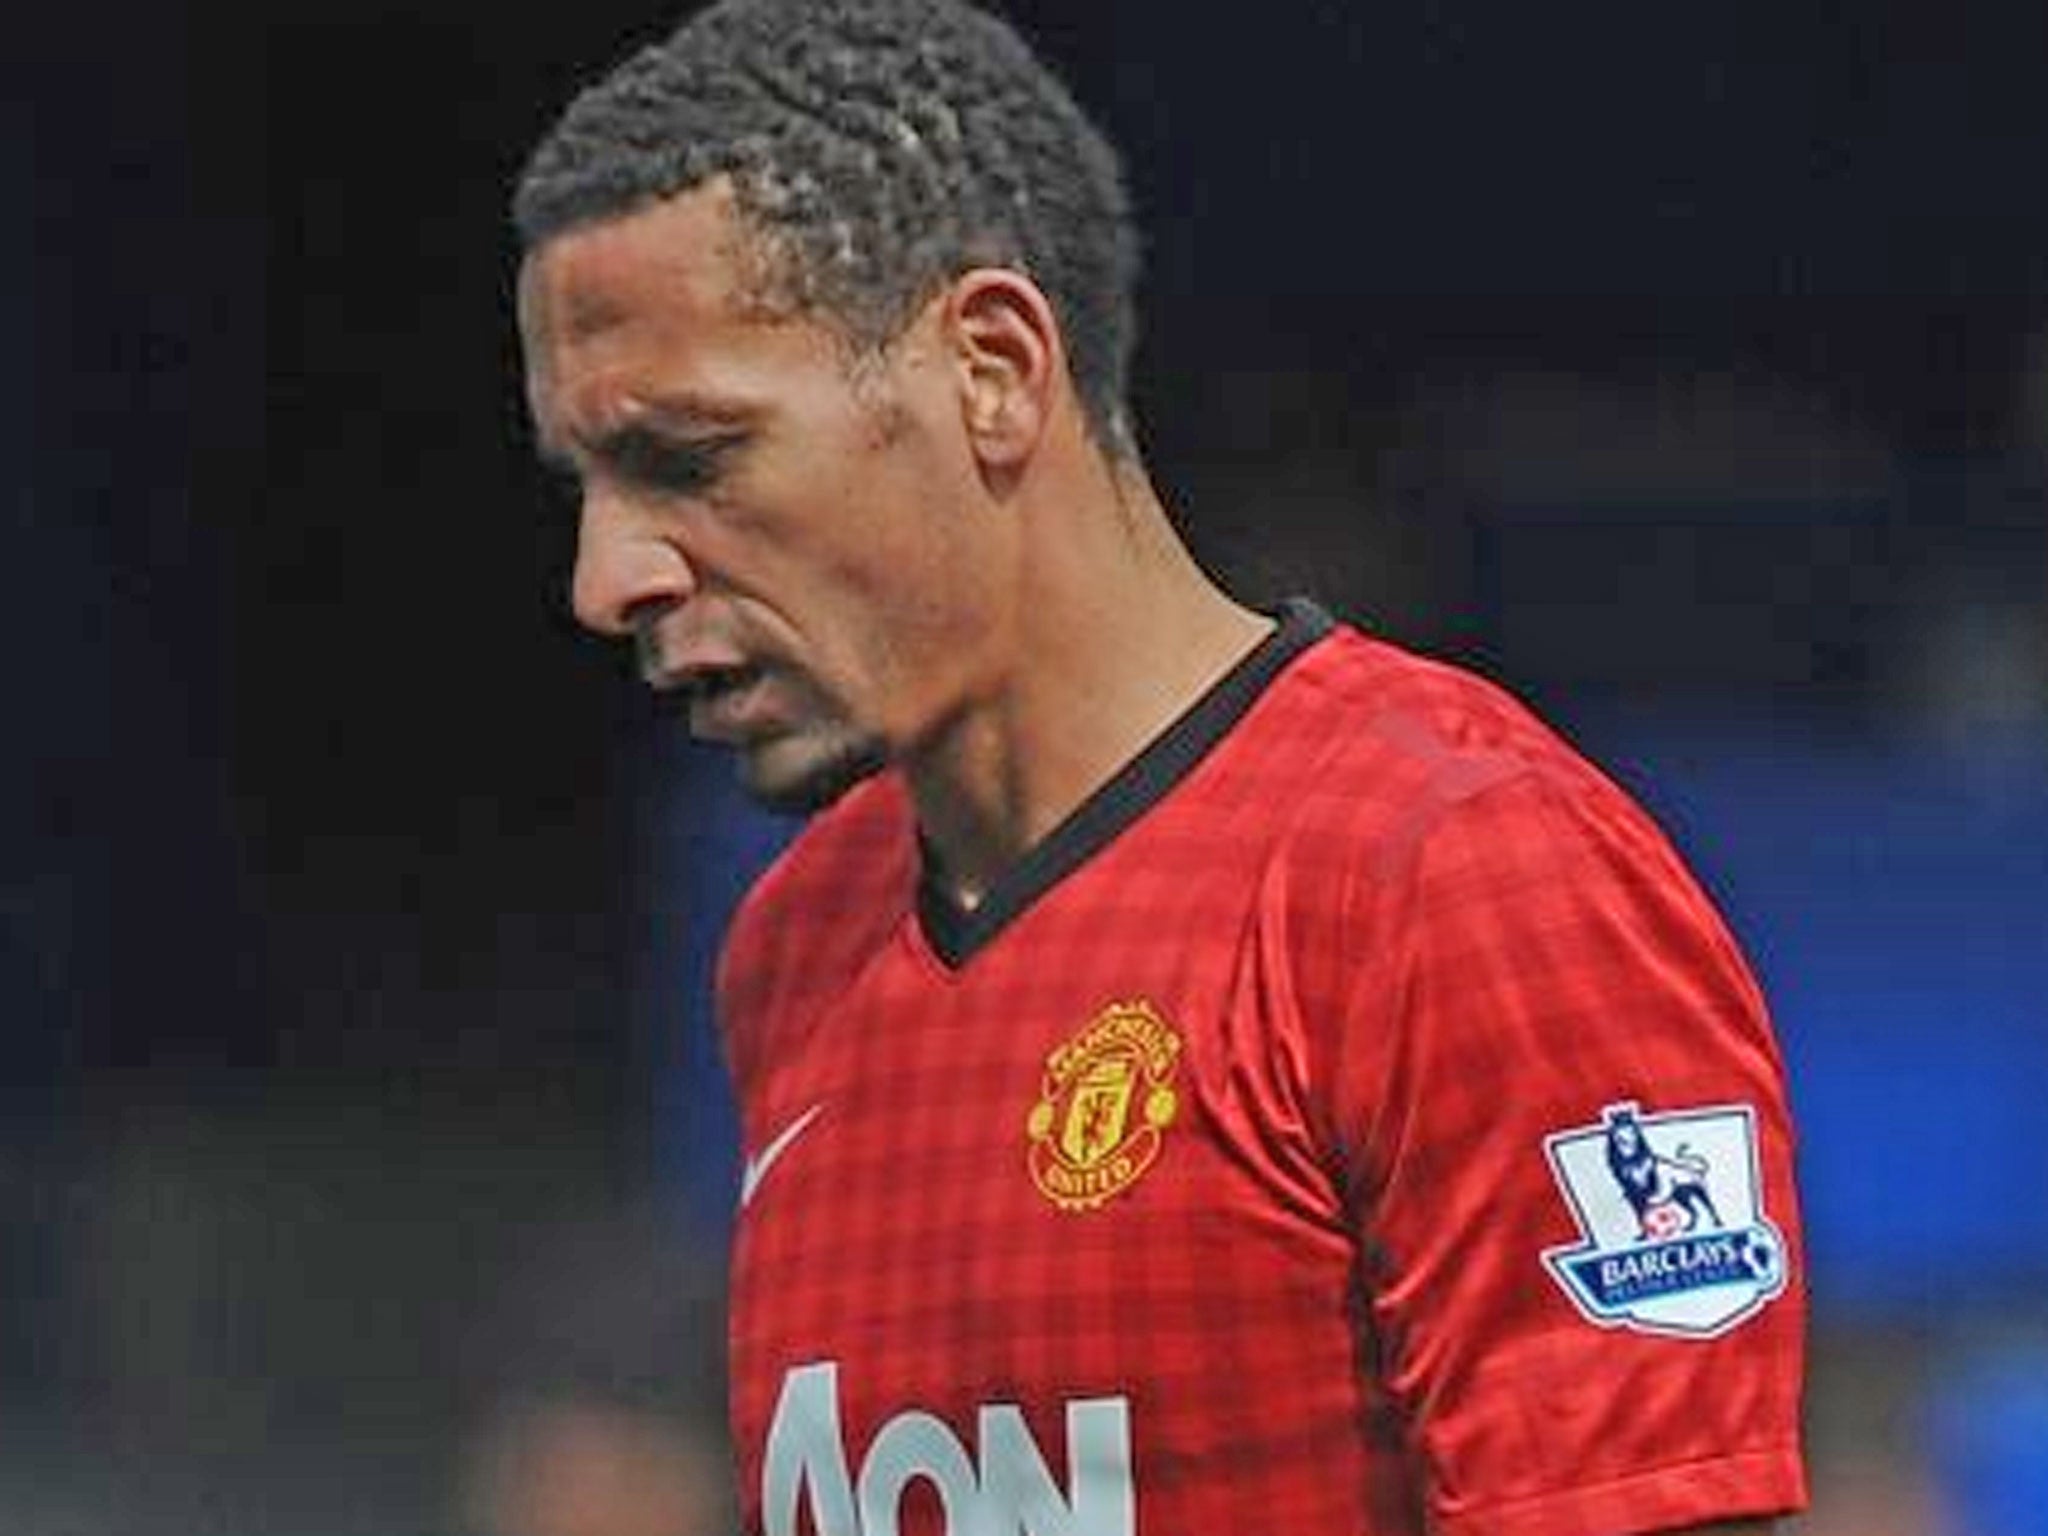 Rio Ferdinand gets a hard time from Chelsea supporters